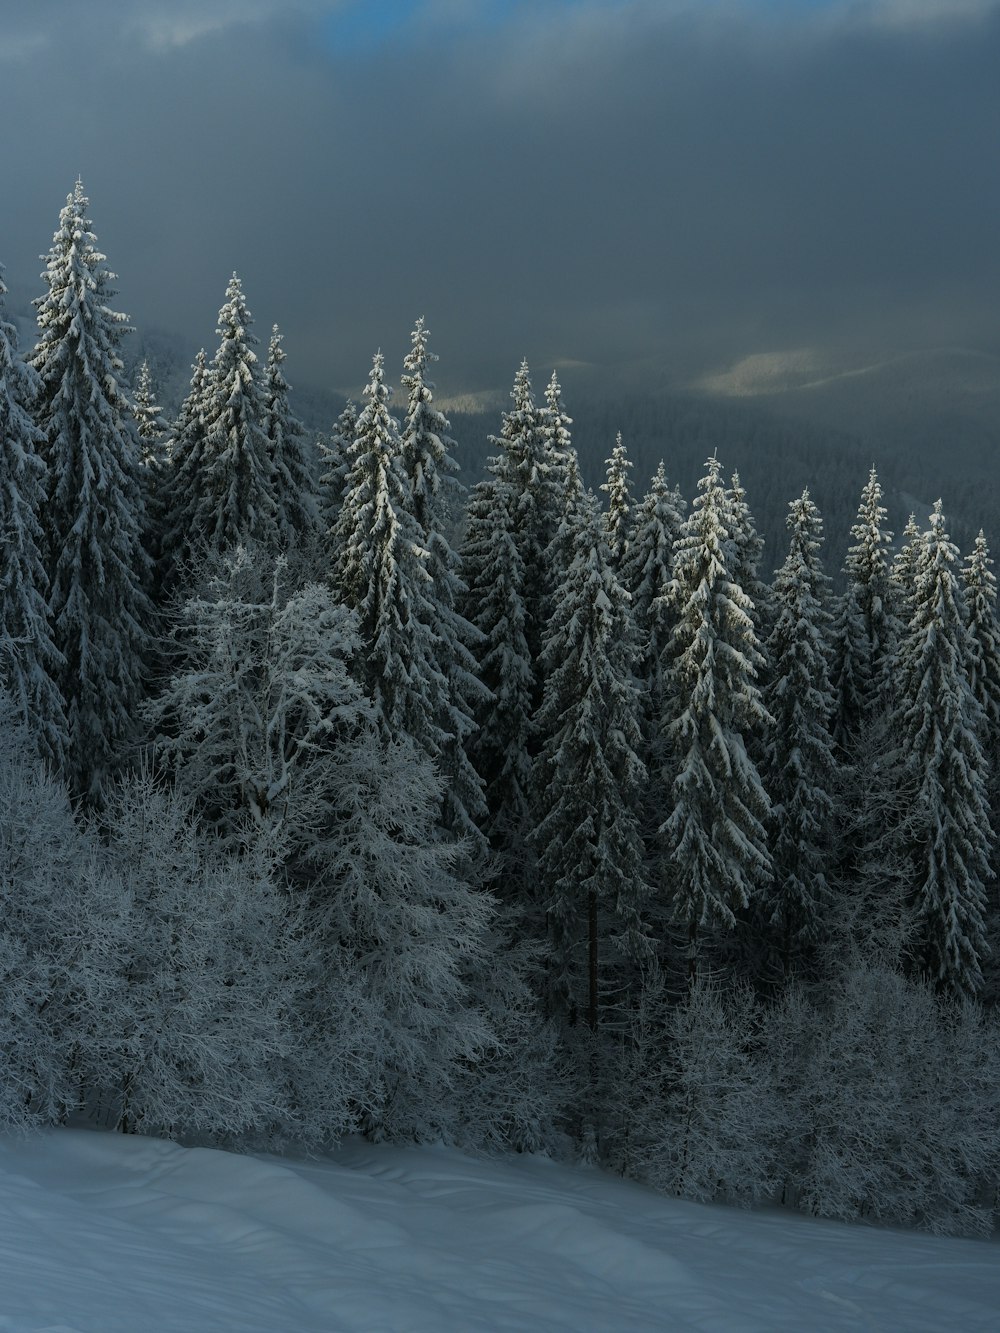 a snow covered forest filled with trees under a cloudy sky